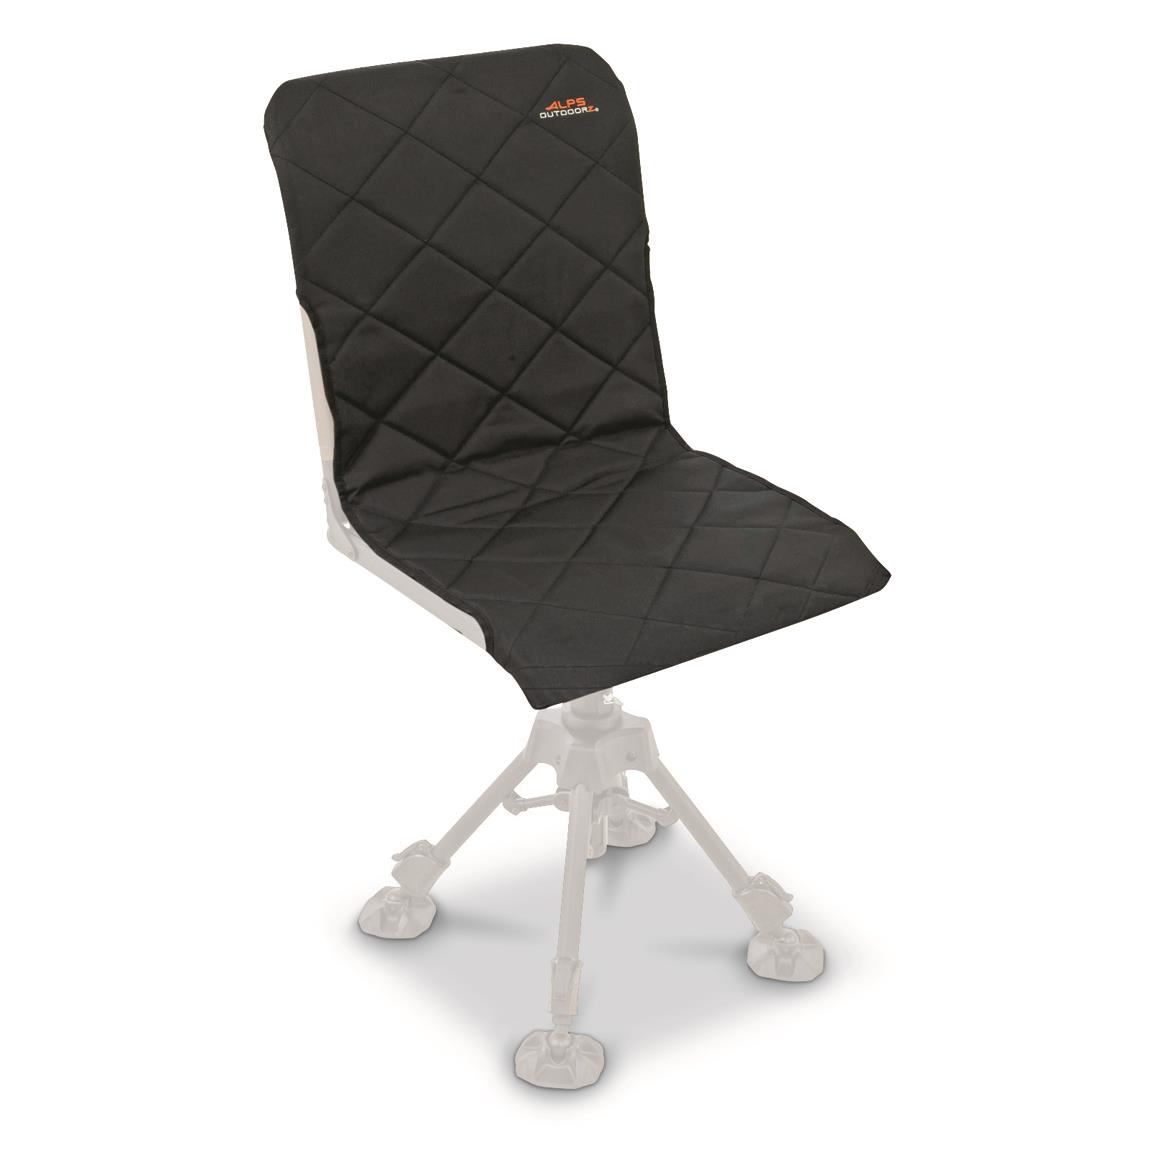 ALPS OutdoorZ Stealth Hunter Blind Chair Seat Cover 